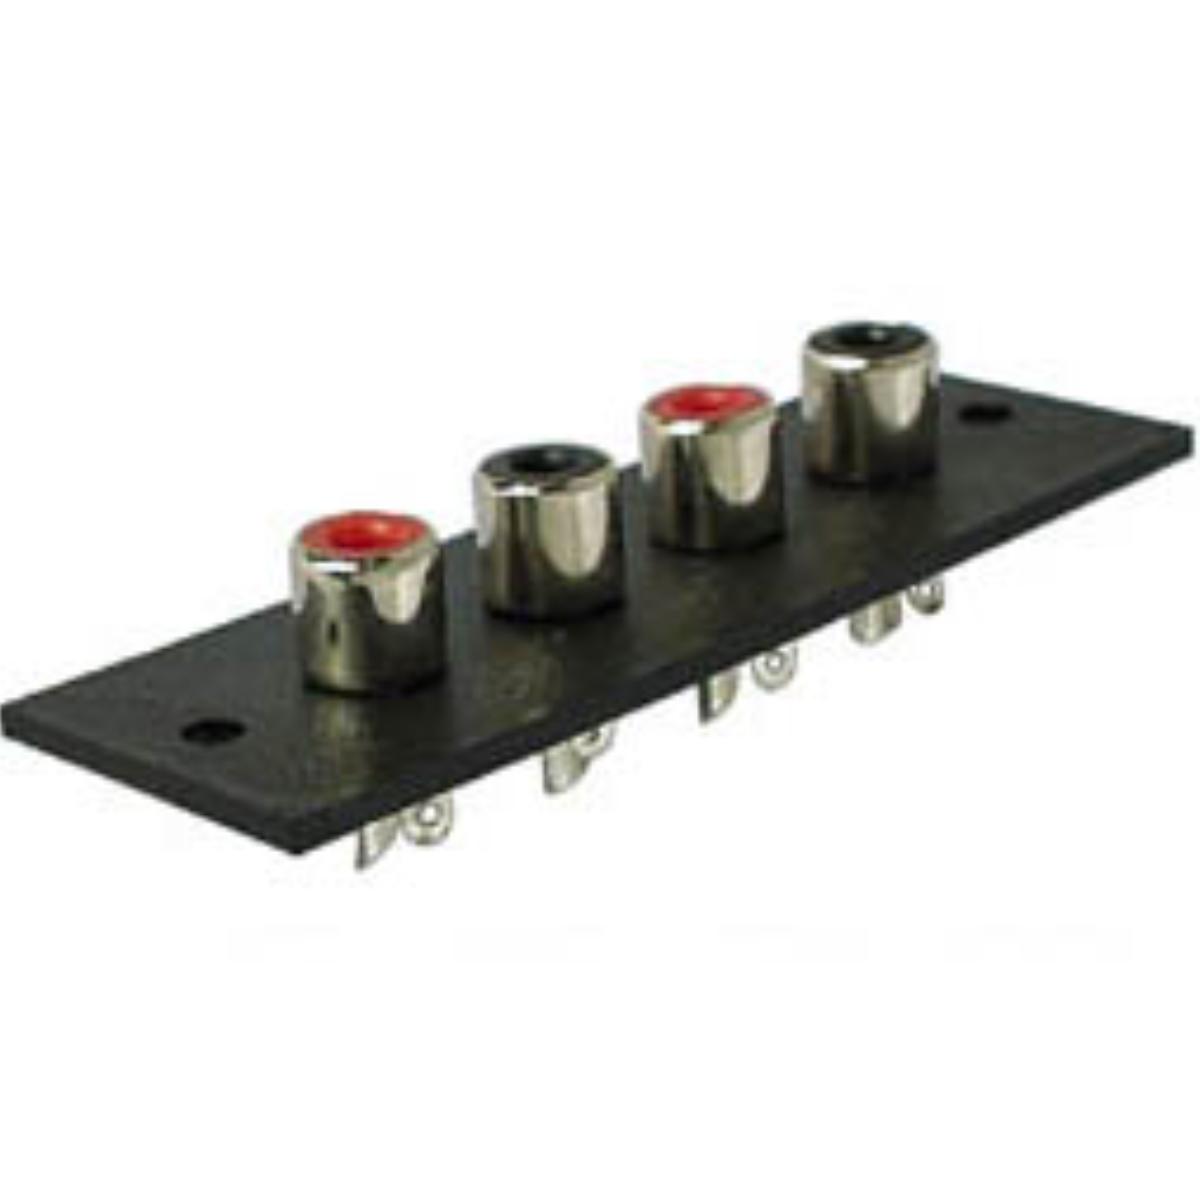 Tulp audio chassisdeel - HQ Products